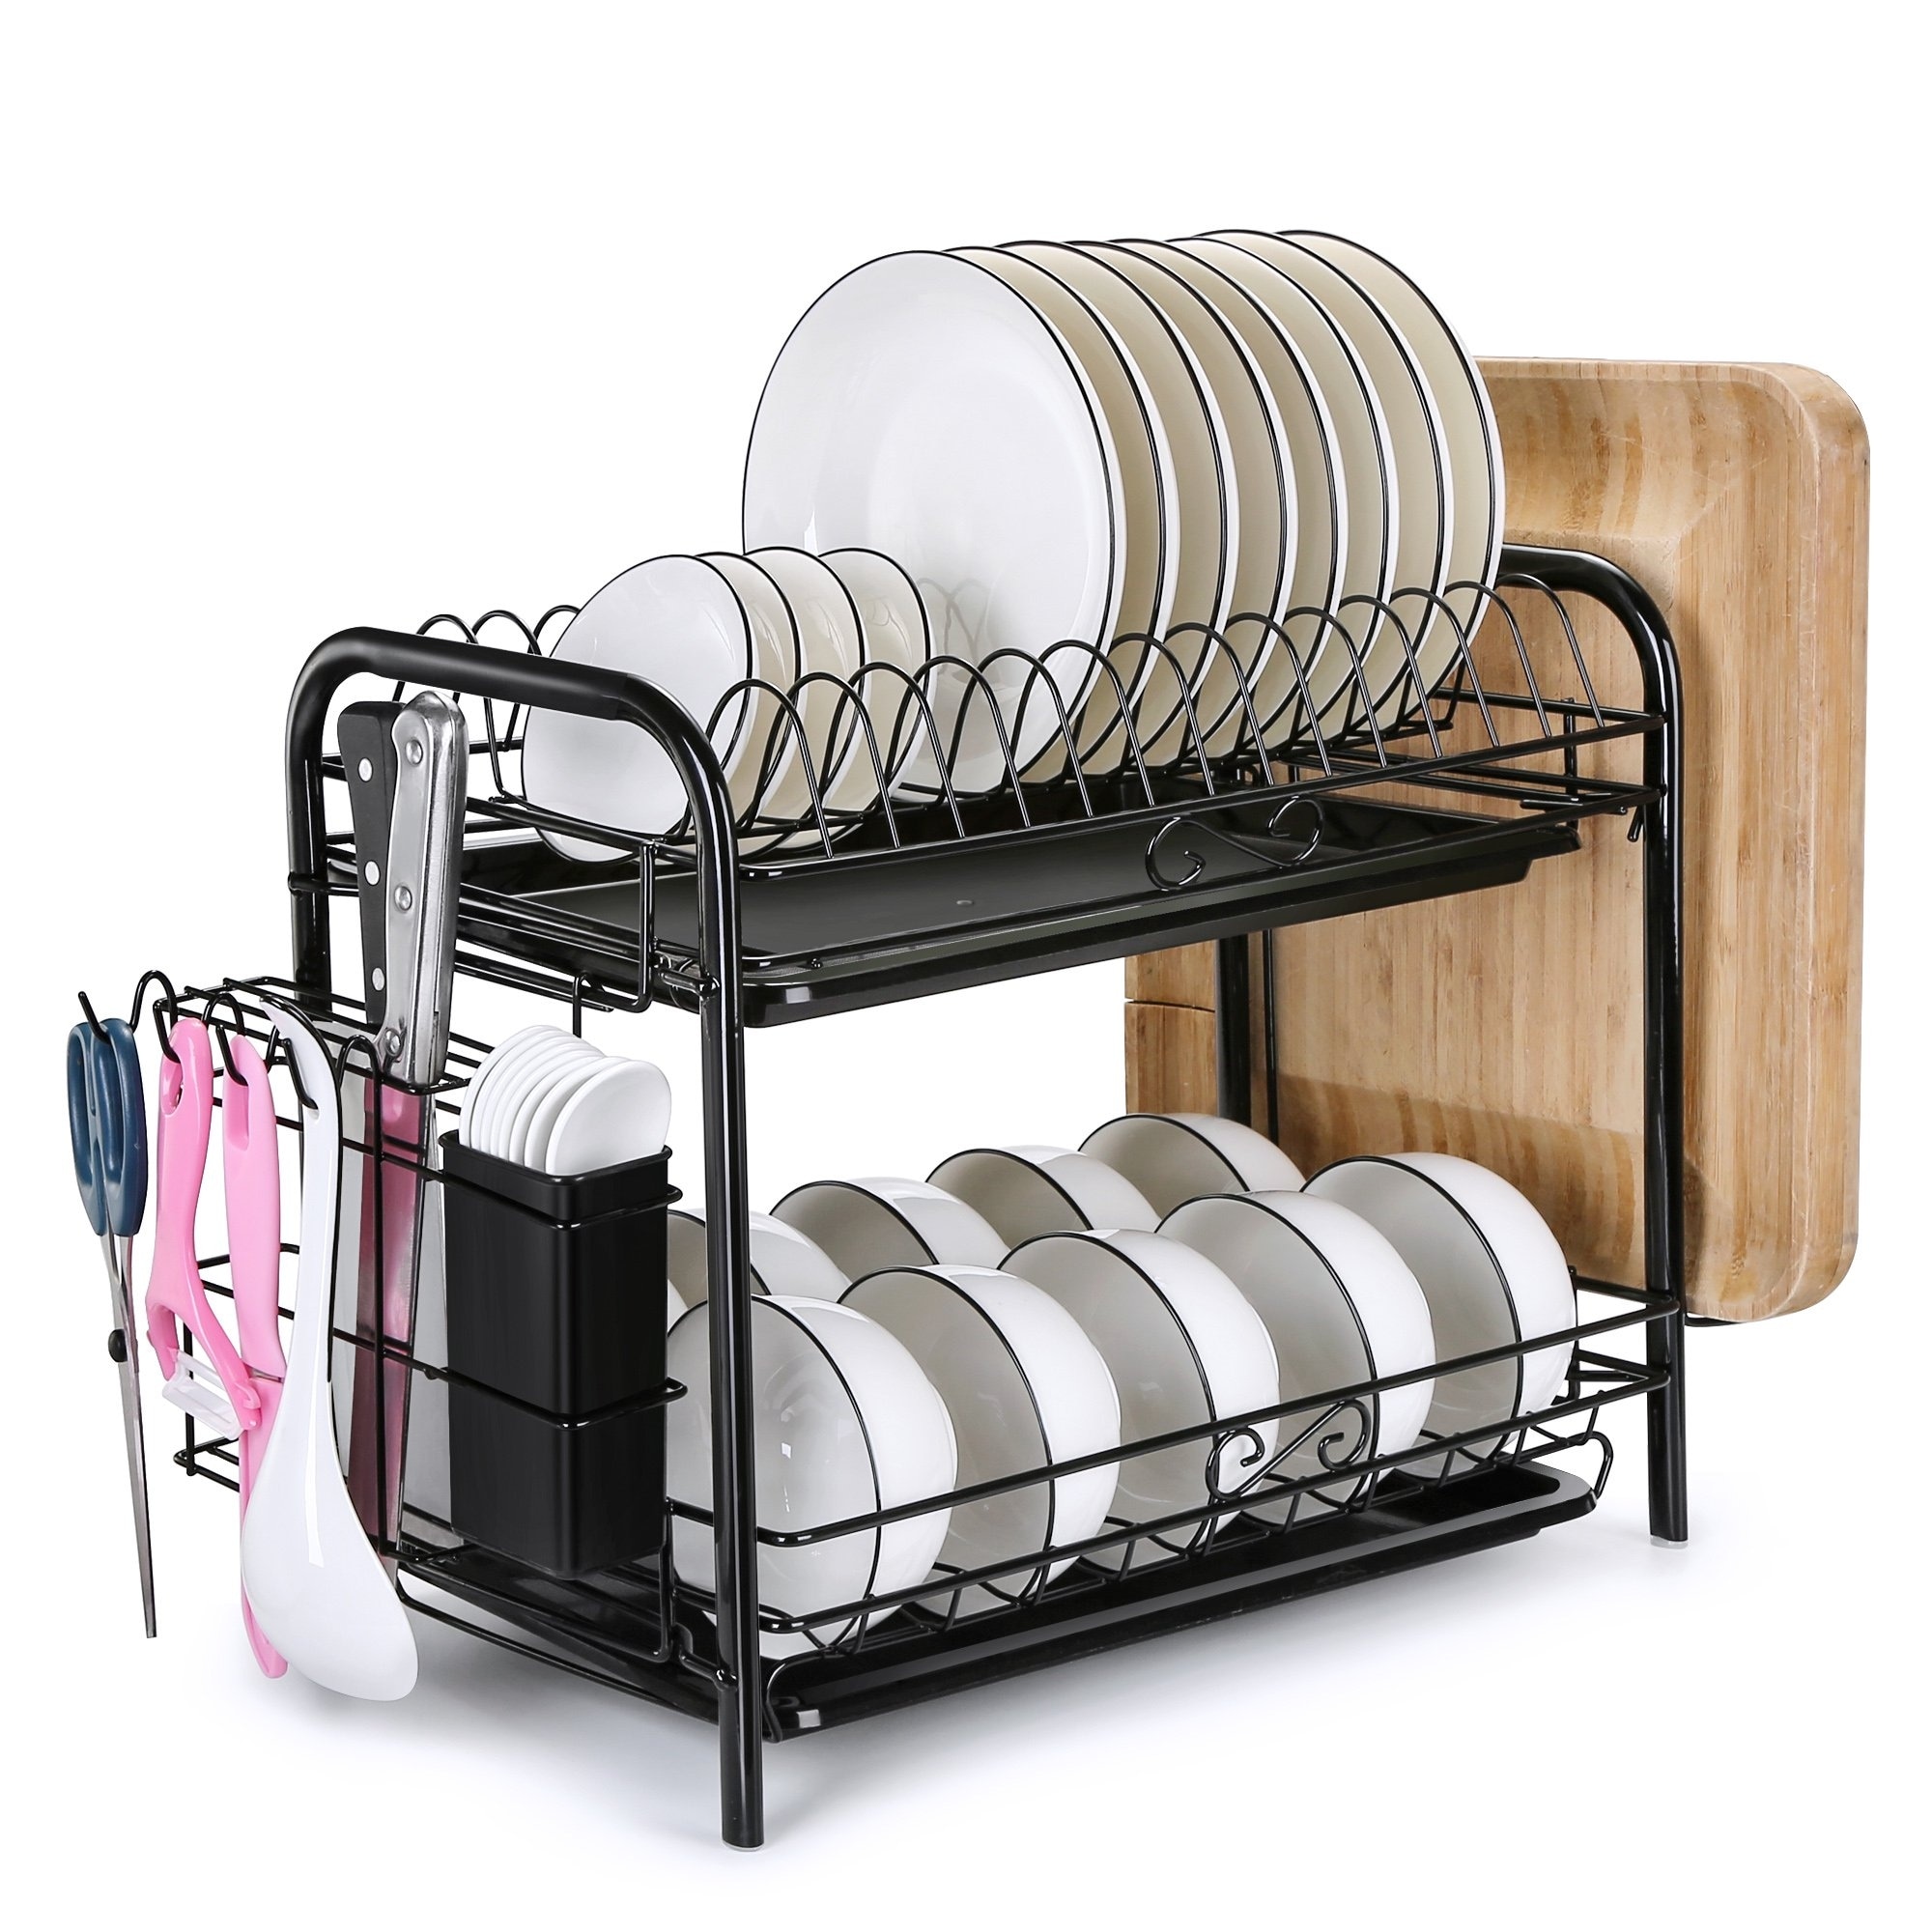 Dish Drying Rack, Stainless Steel Dish Rack and Drainboard Set,  Expandable(11. ) Sink Dish Drainer with Cup Holder Utensil Holder for  Kitchen Counter White 